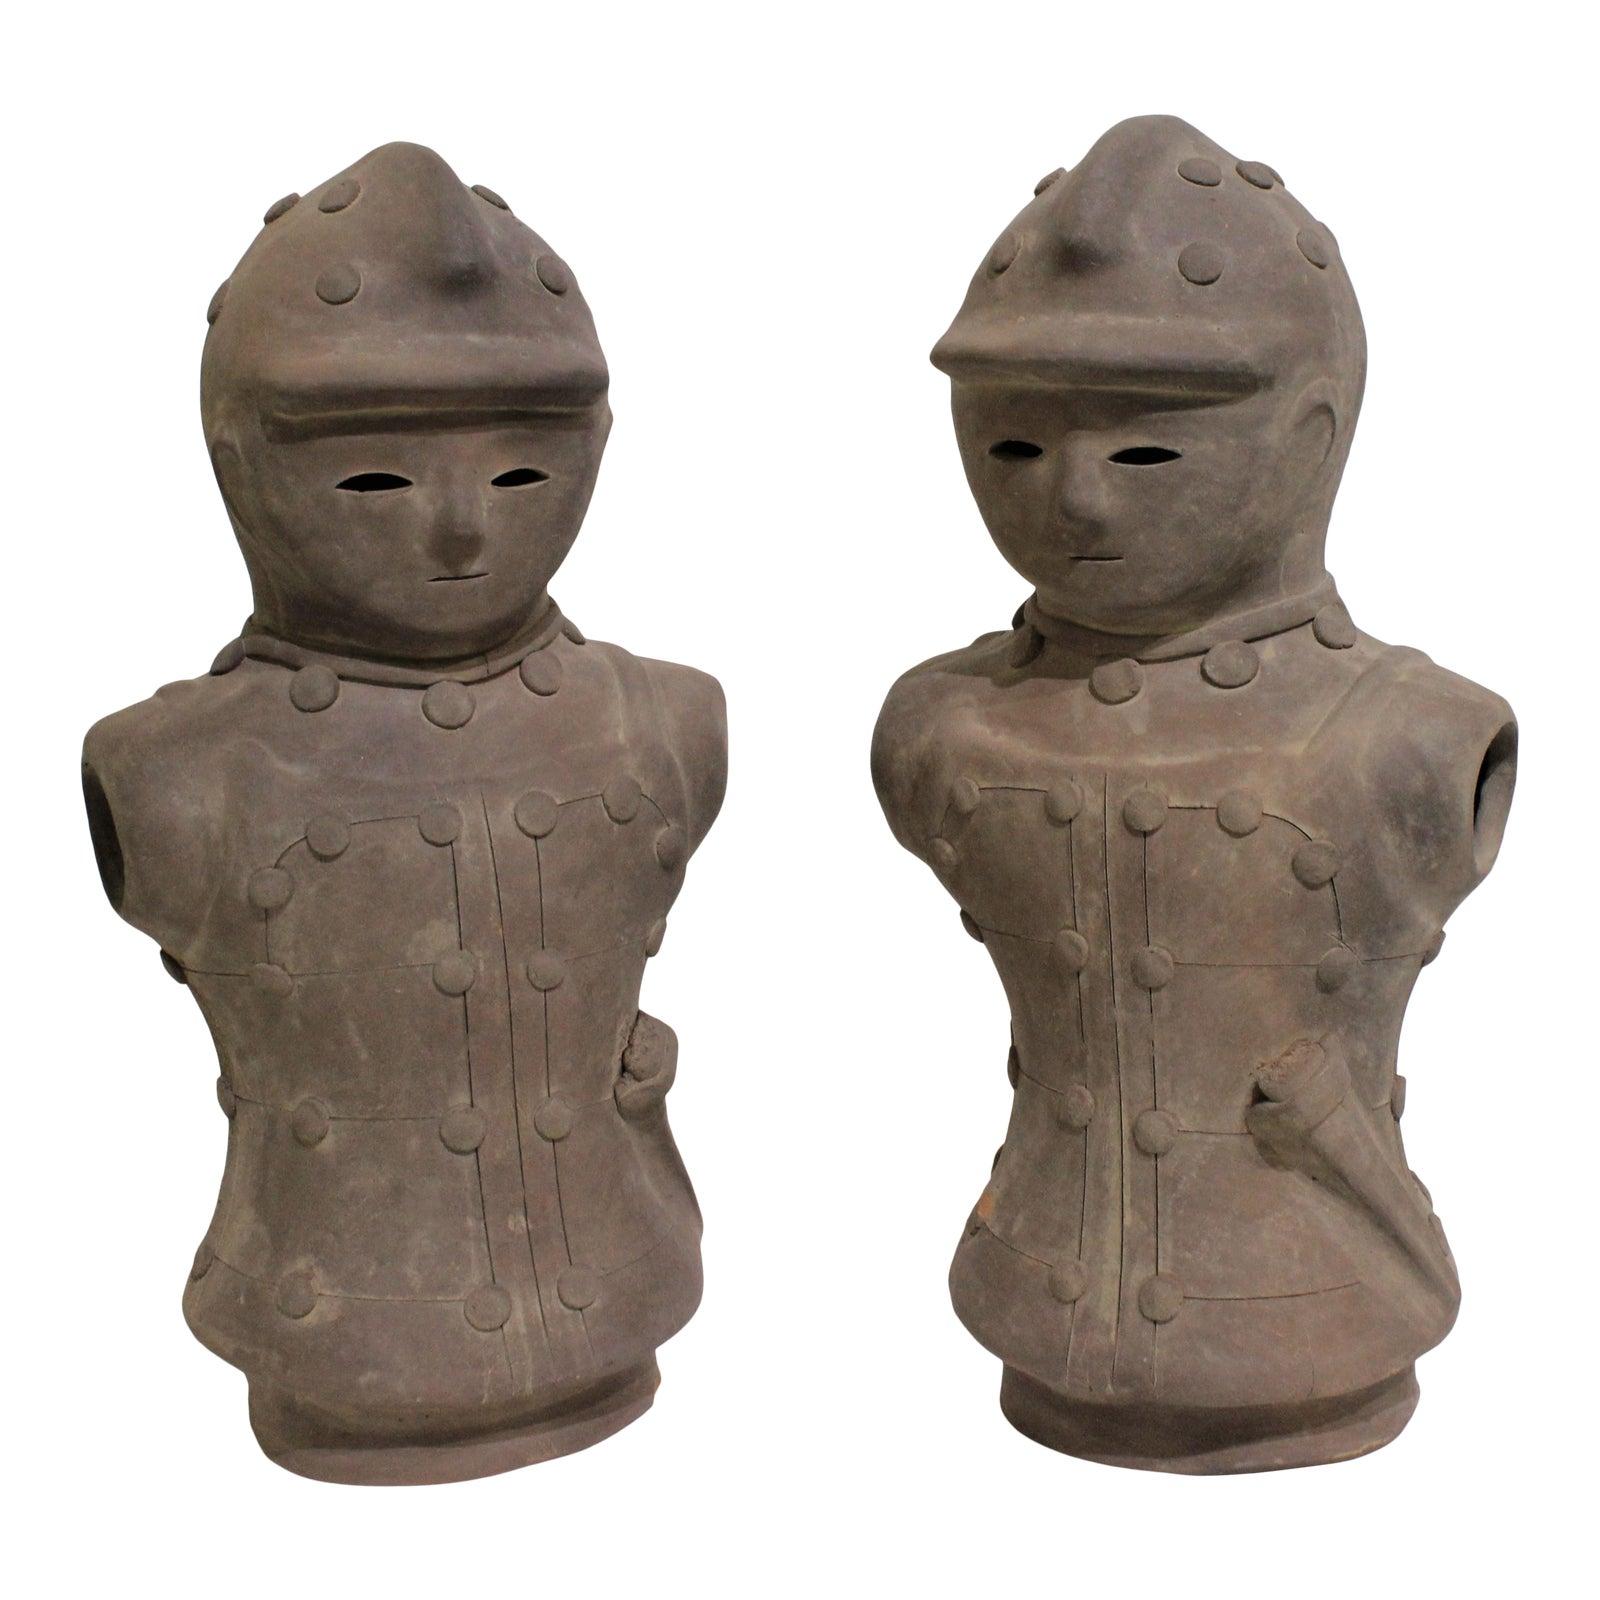 What was the purpose of a Haniwa warrior?